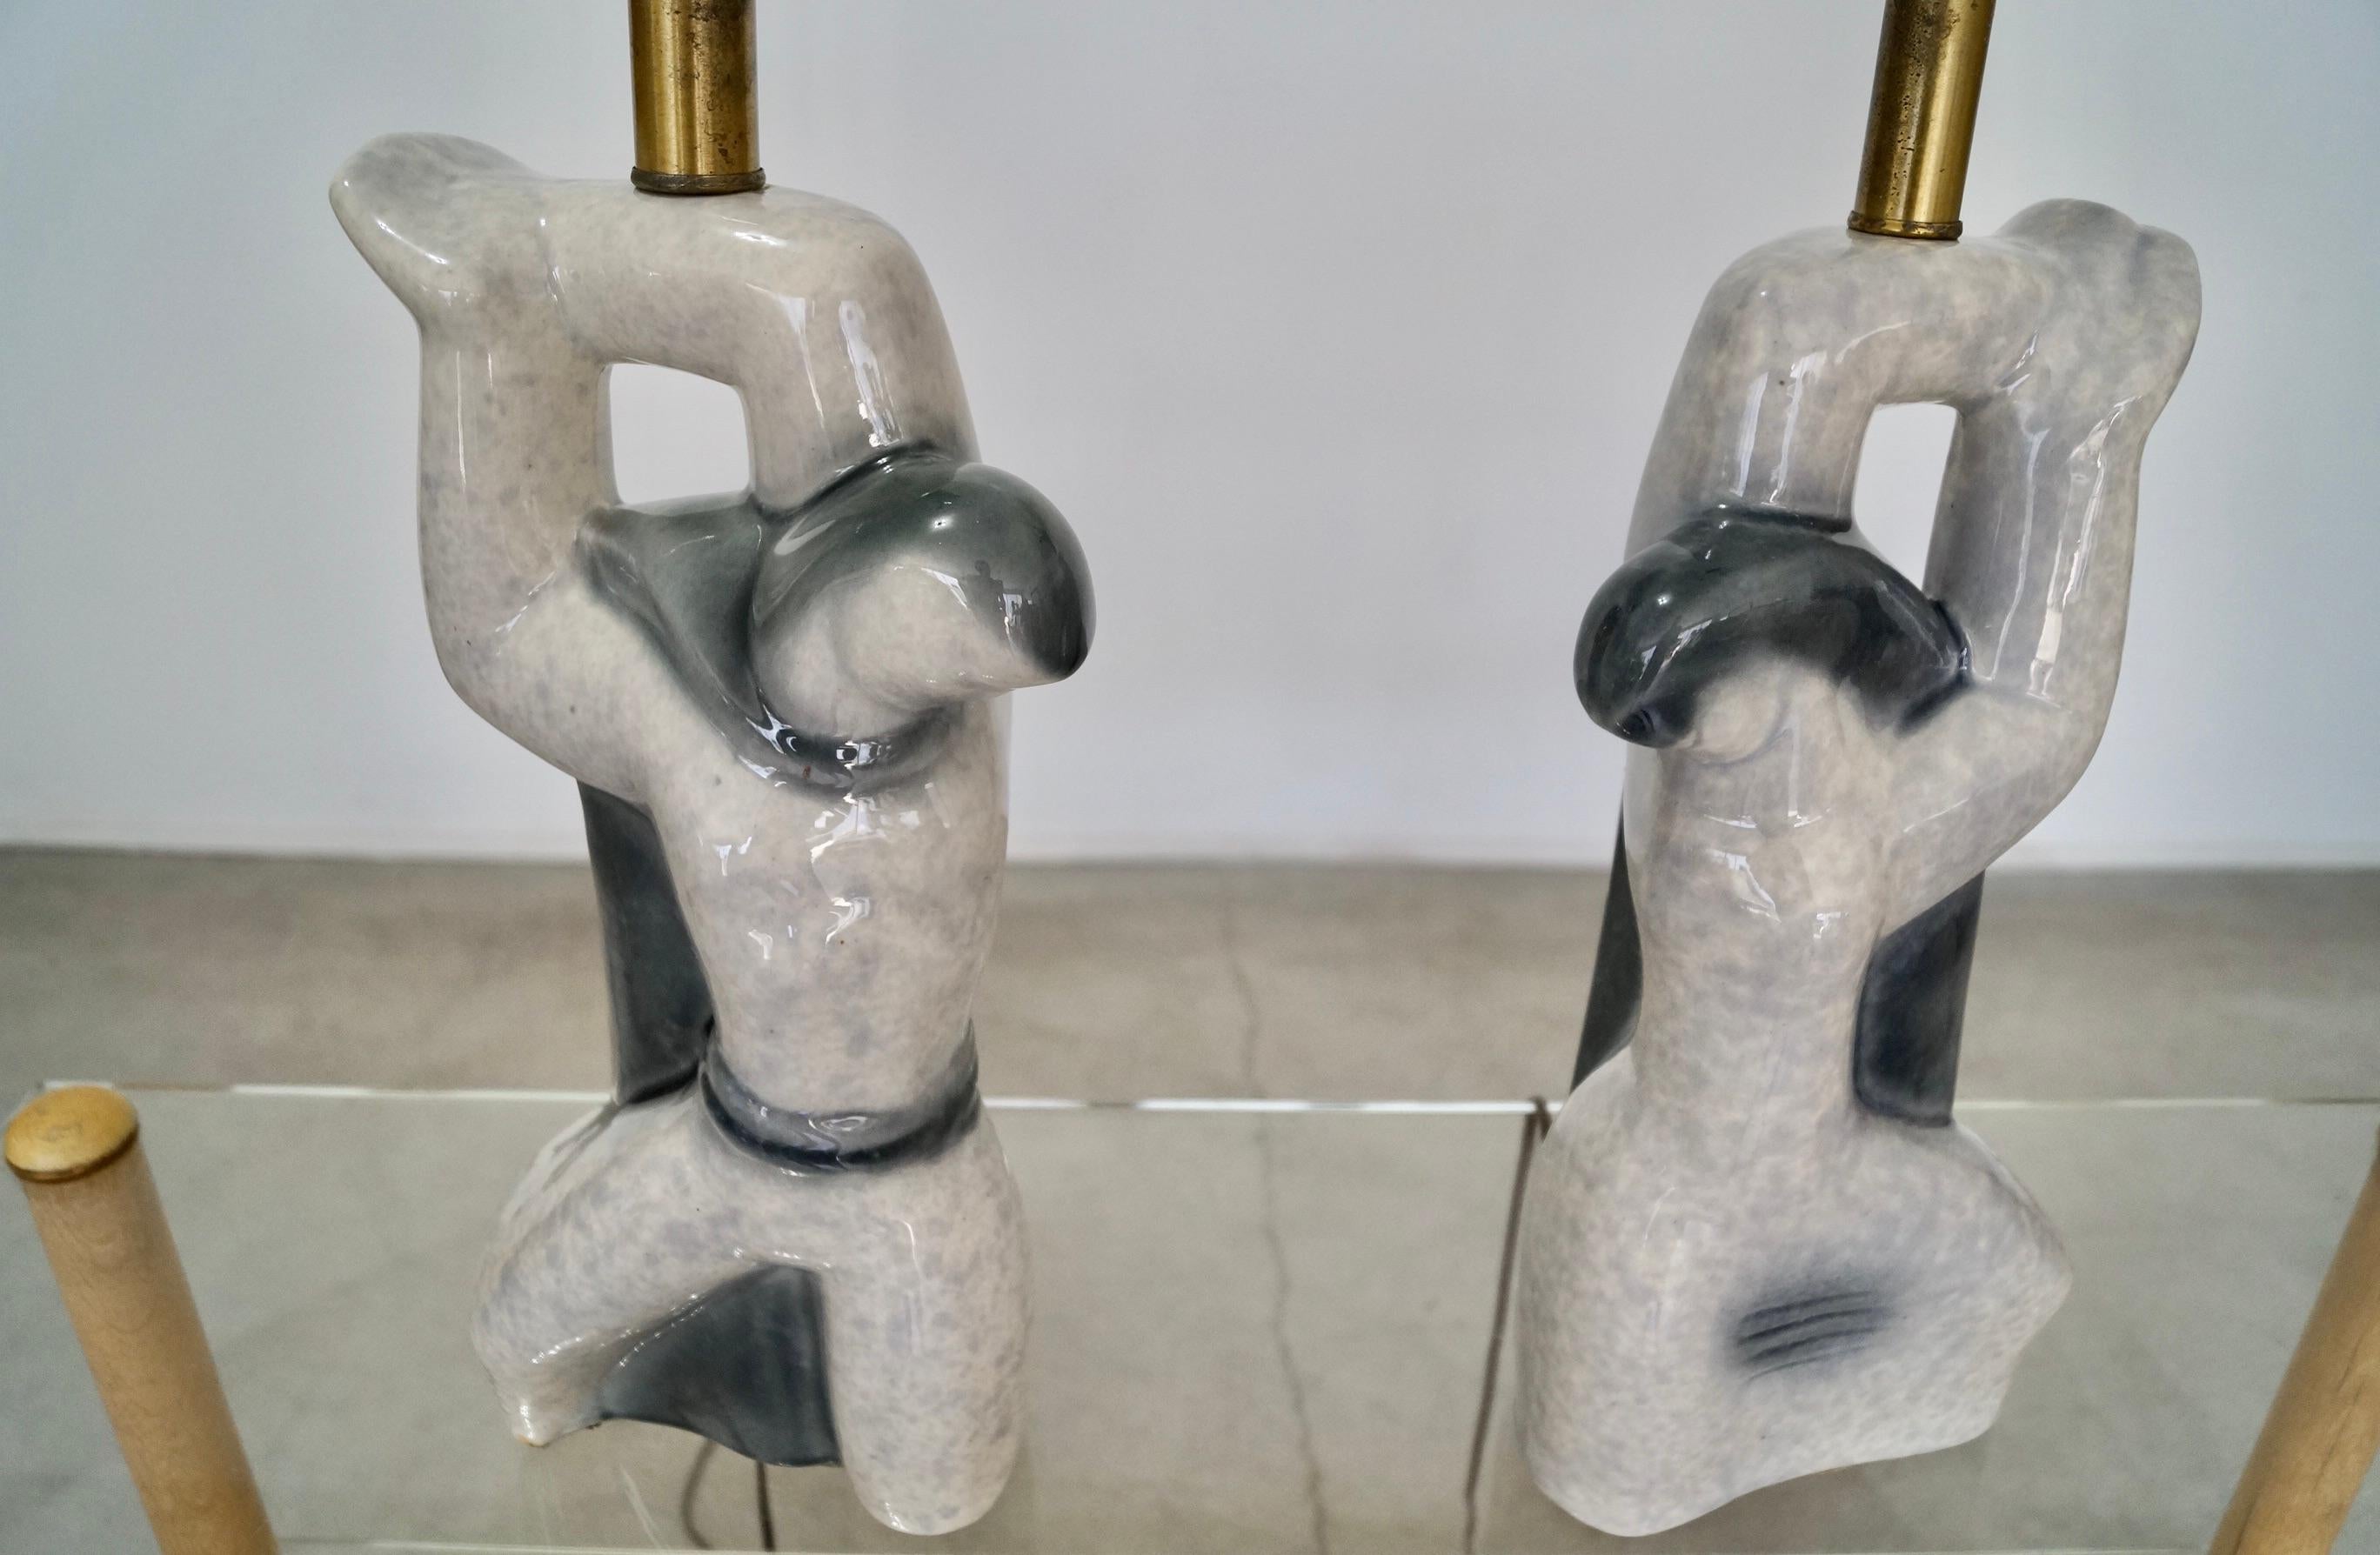 Pair of 1950's Heifetz Figurine Sculpture Table Lamps In Good Condition For Sale In Burbank, CA